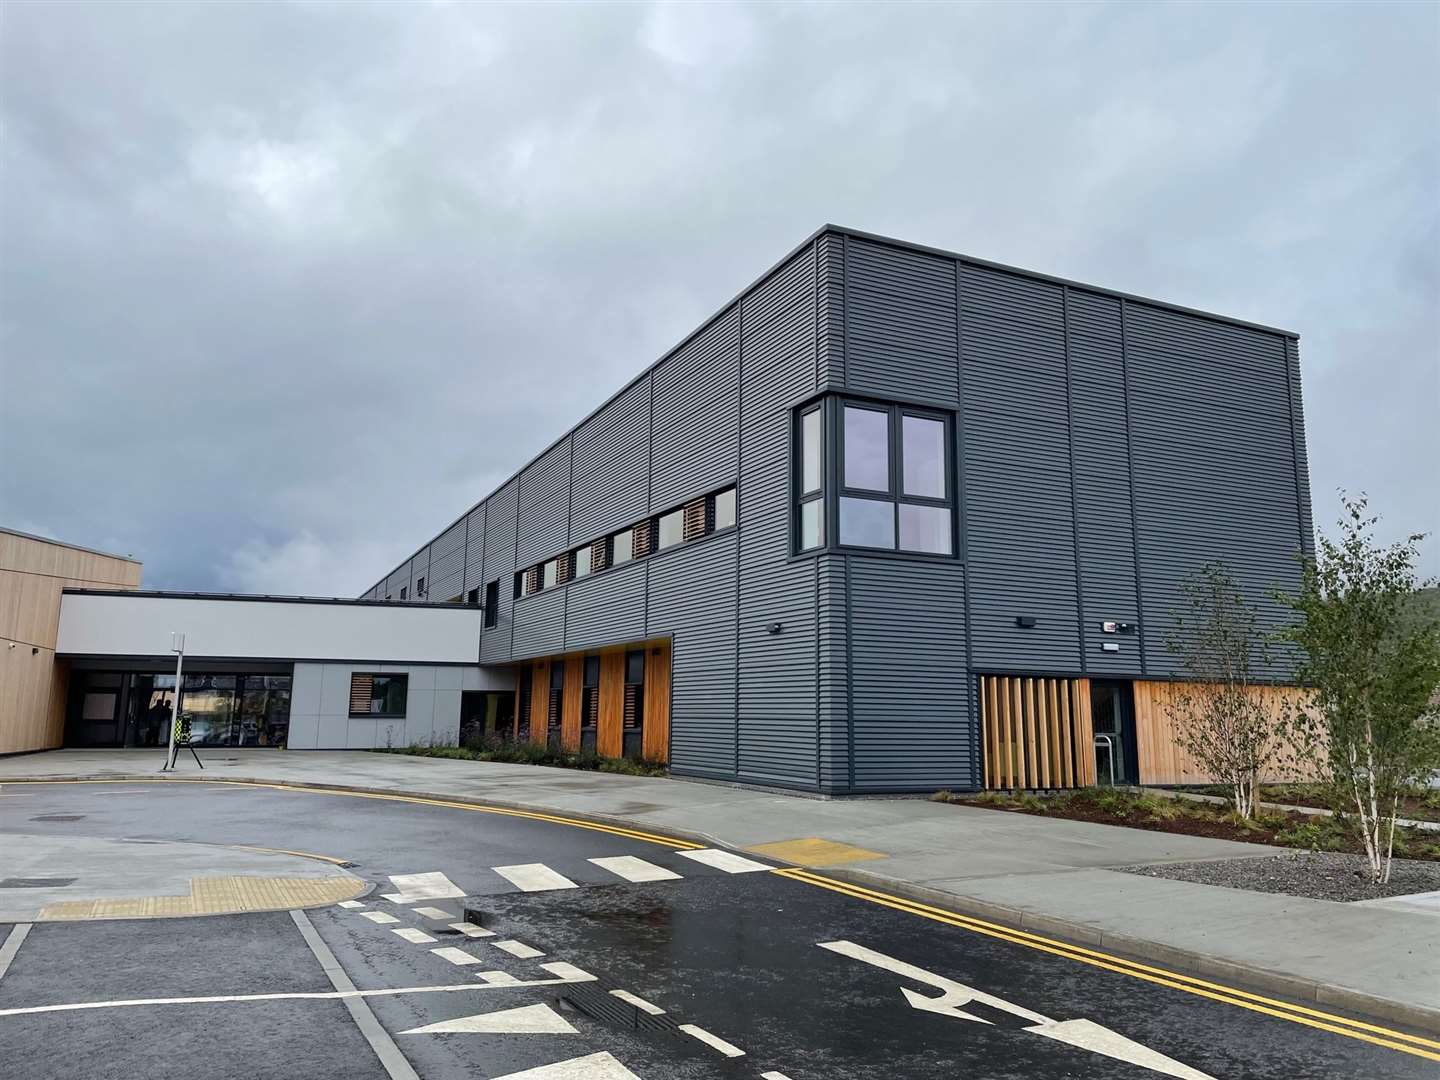 The new Badenoch and Strathspey Community Hospital which opened last Autumn in Aviemore.